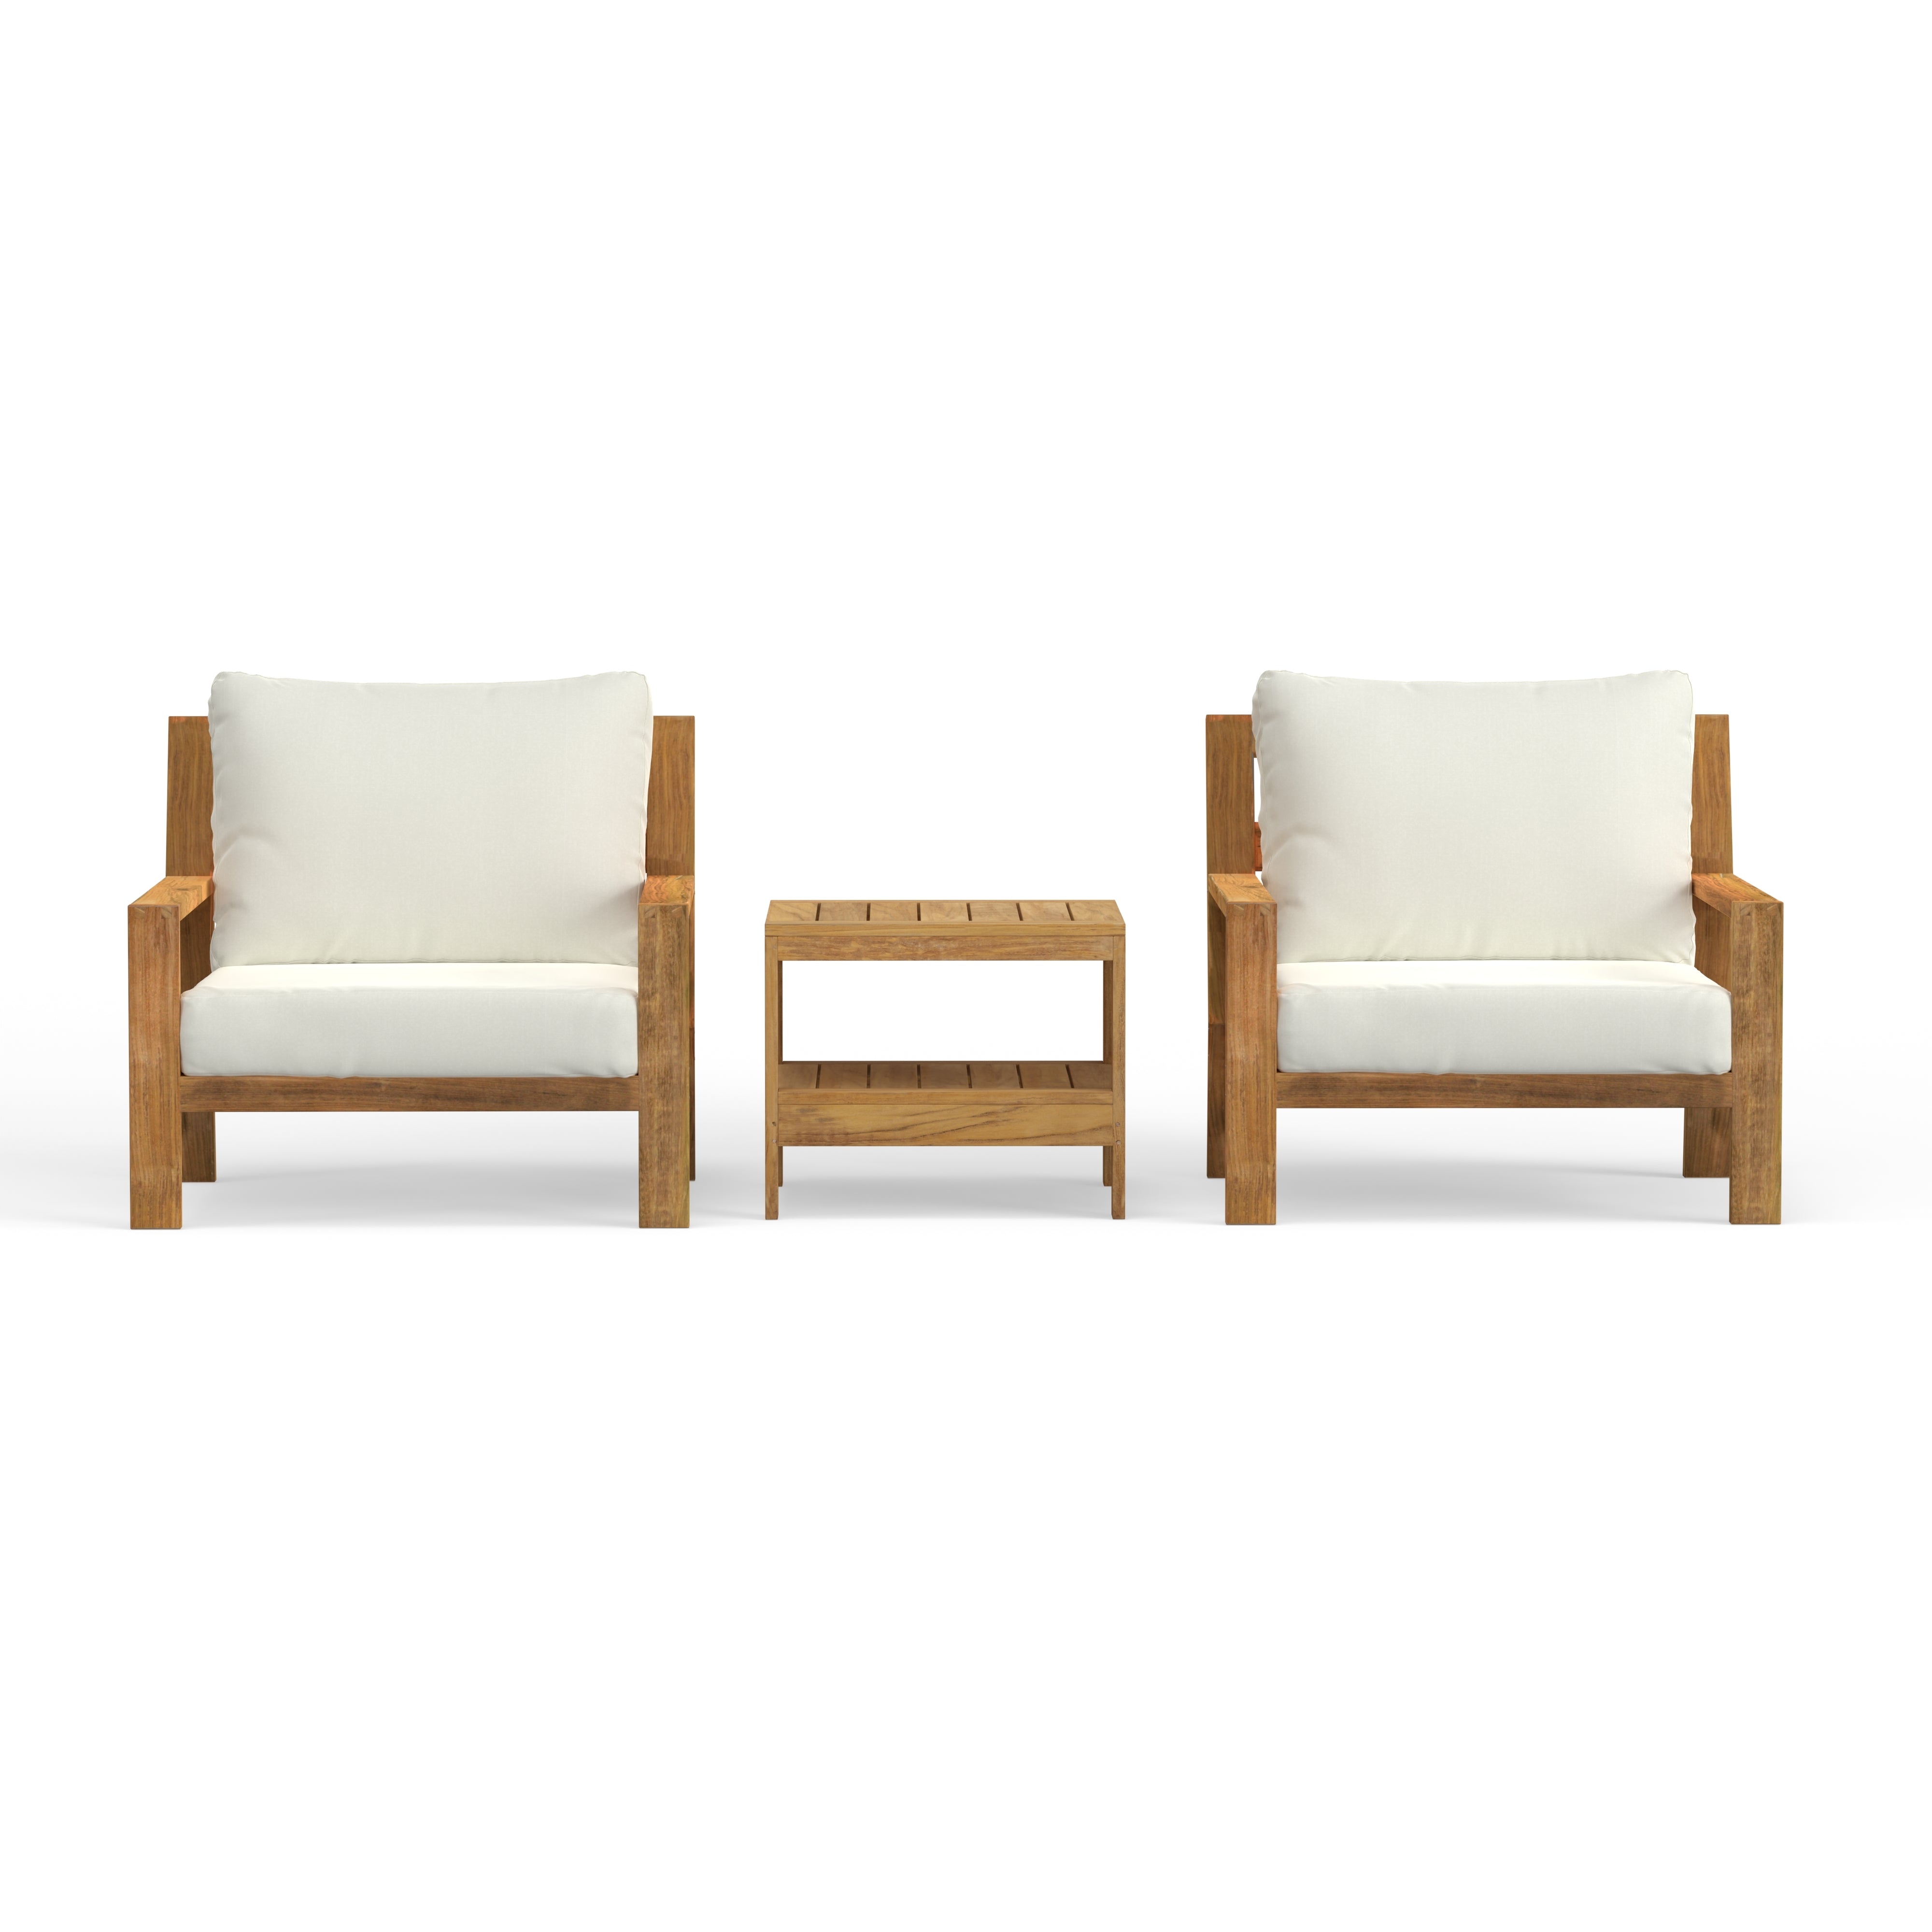 Luxury Outdoor Club Chair For Two Set